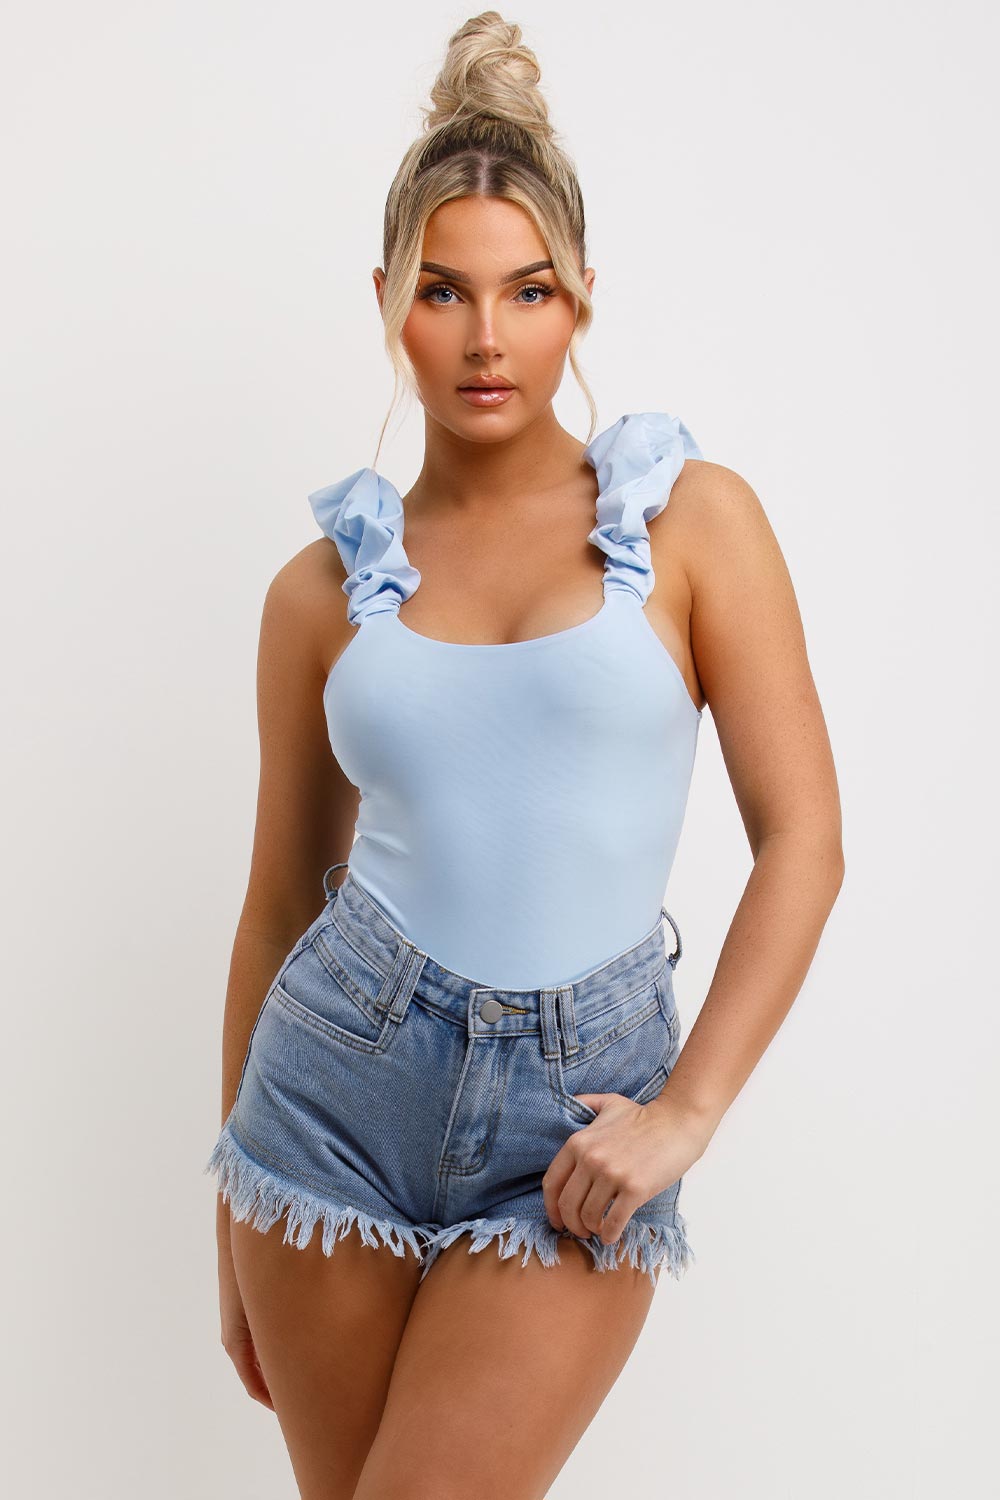 Women's Ruffle Ruched Strap Going Out Bodysuit Top Sky Blue –